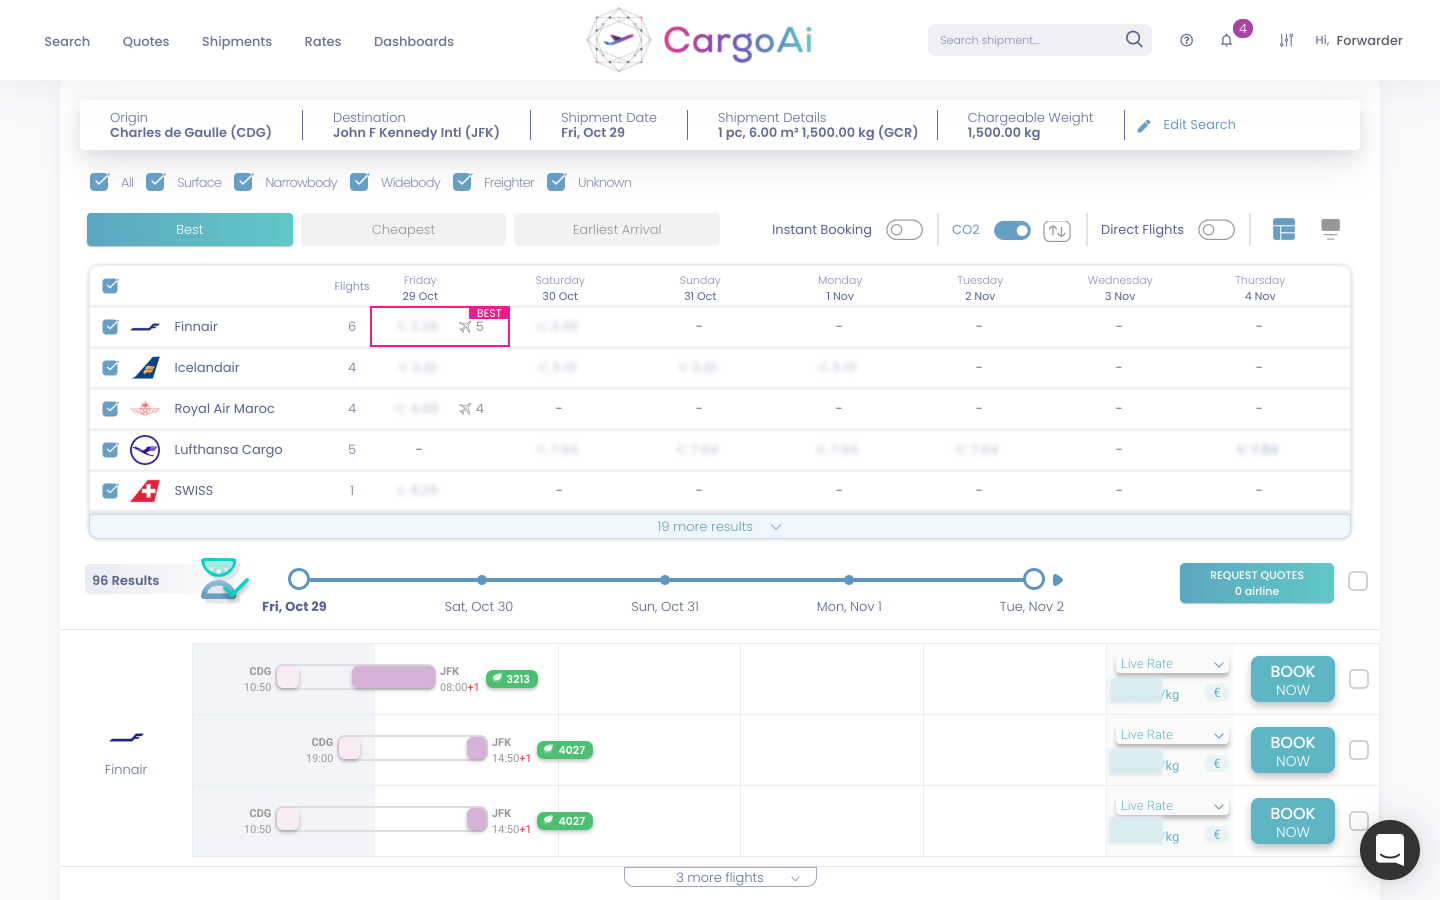 Air Cargo search engine software helps forwarders find alternative routes and cheaper spot rates